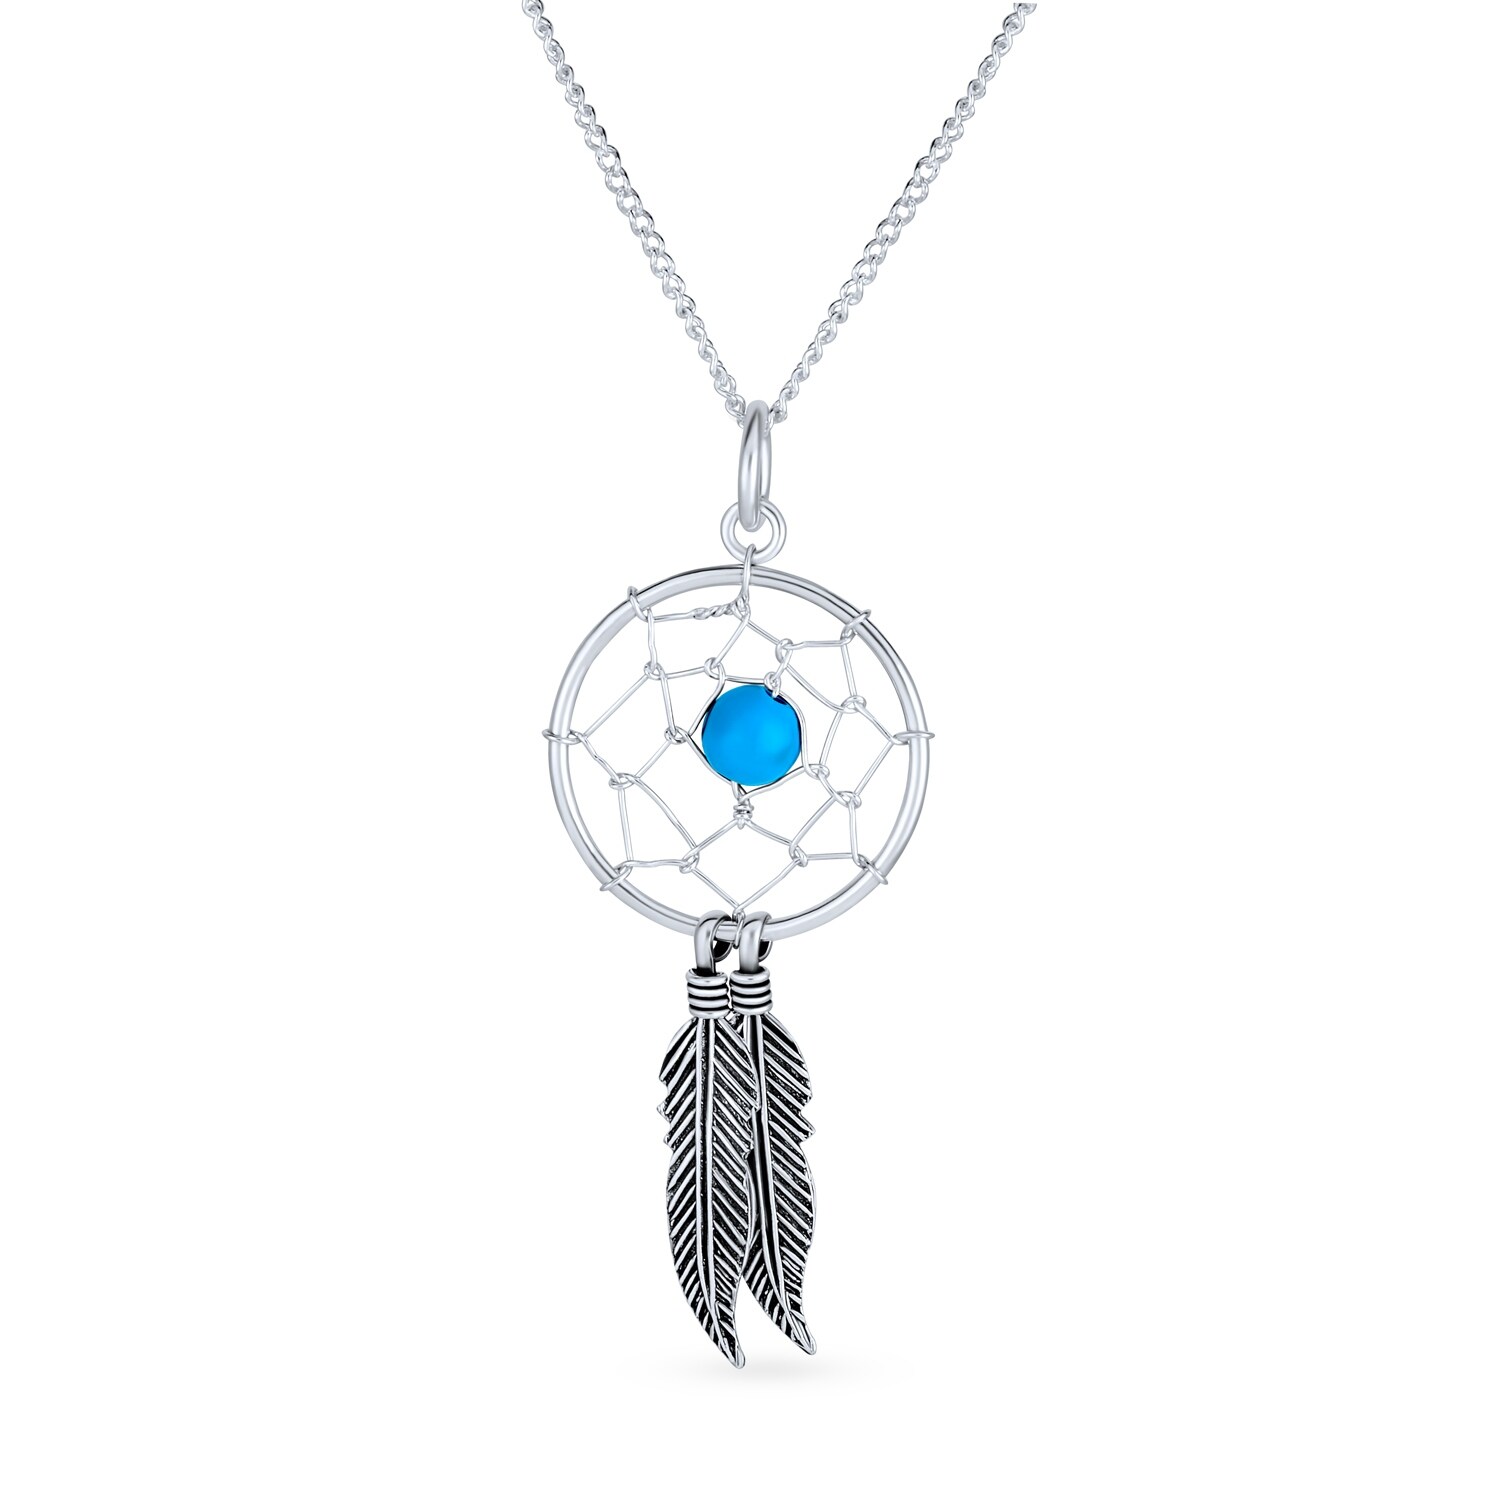 17 Sterling Silver Dream Catcher Charm Necklace